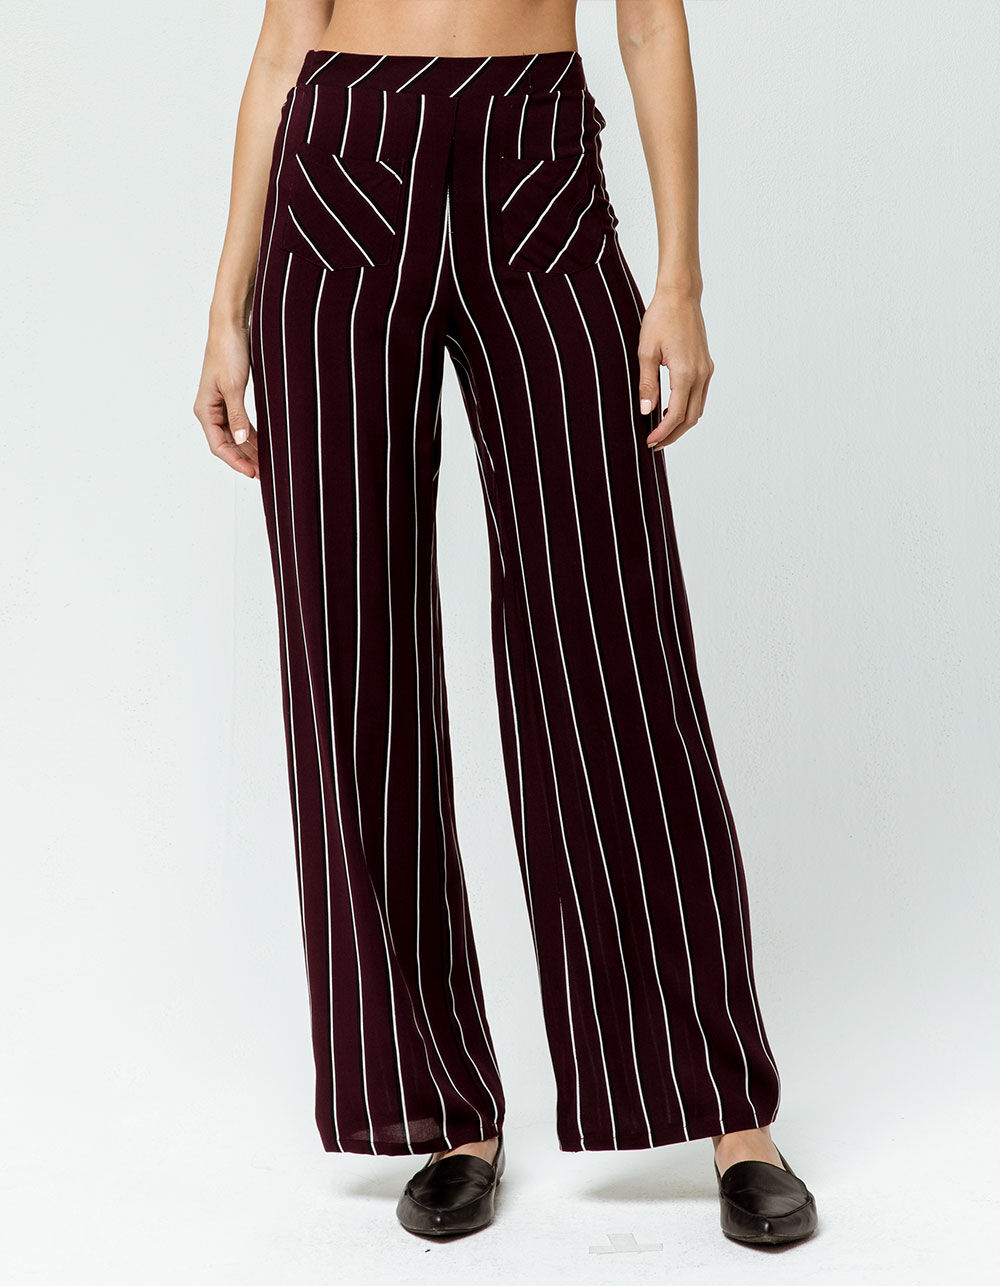 SKY AND SPARROW Pocket Front Stripe Womens Wide Leg Pants - BURGUNDY ...